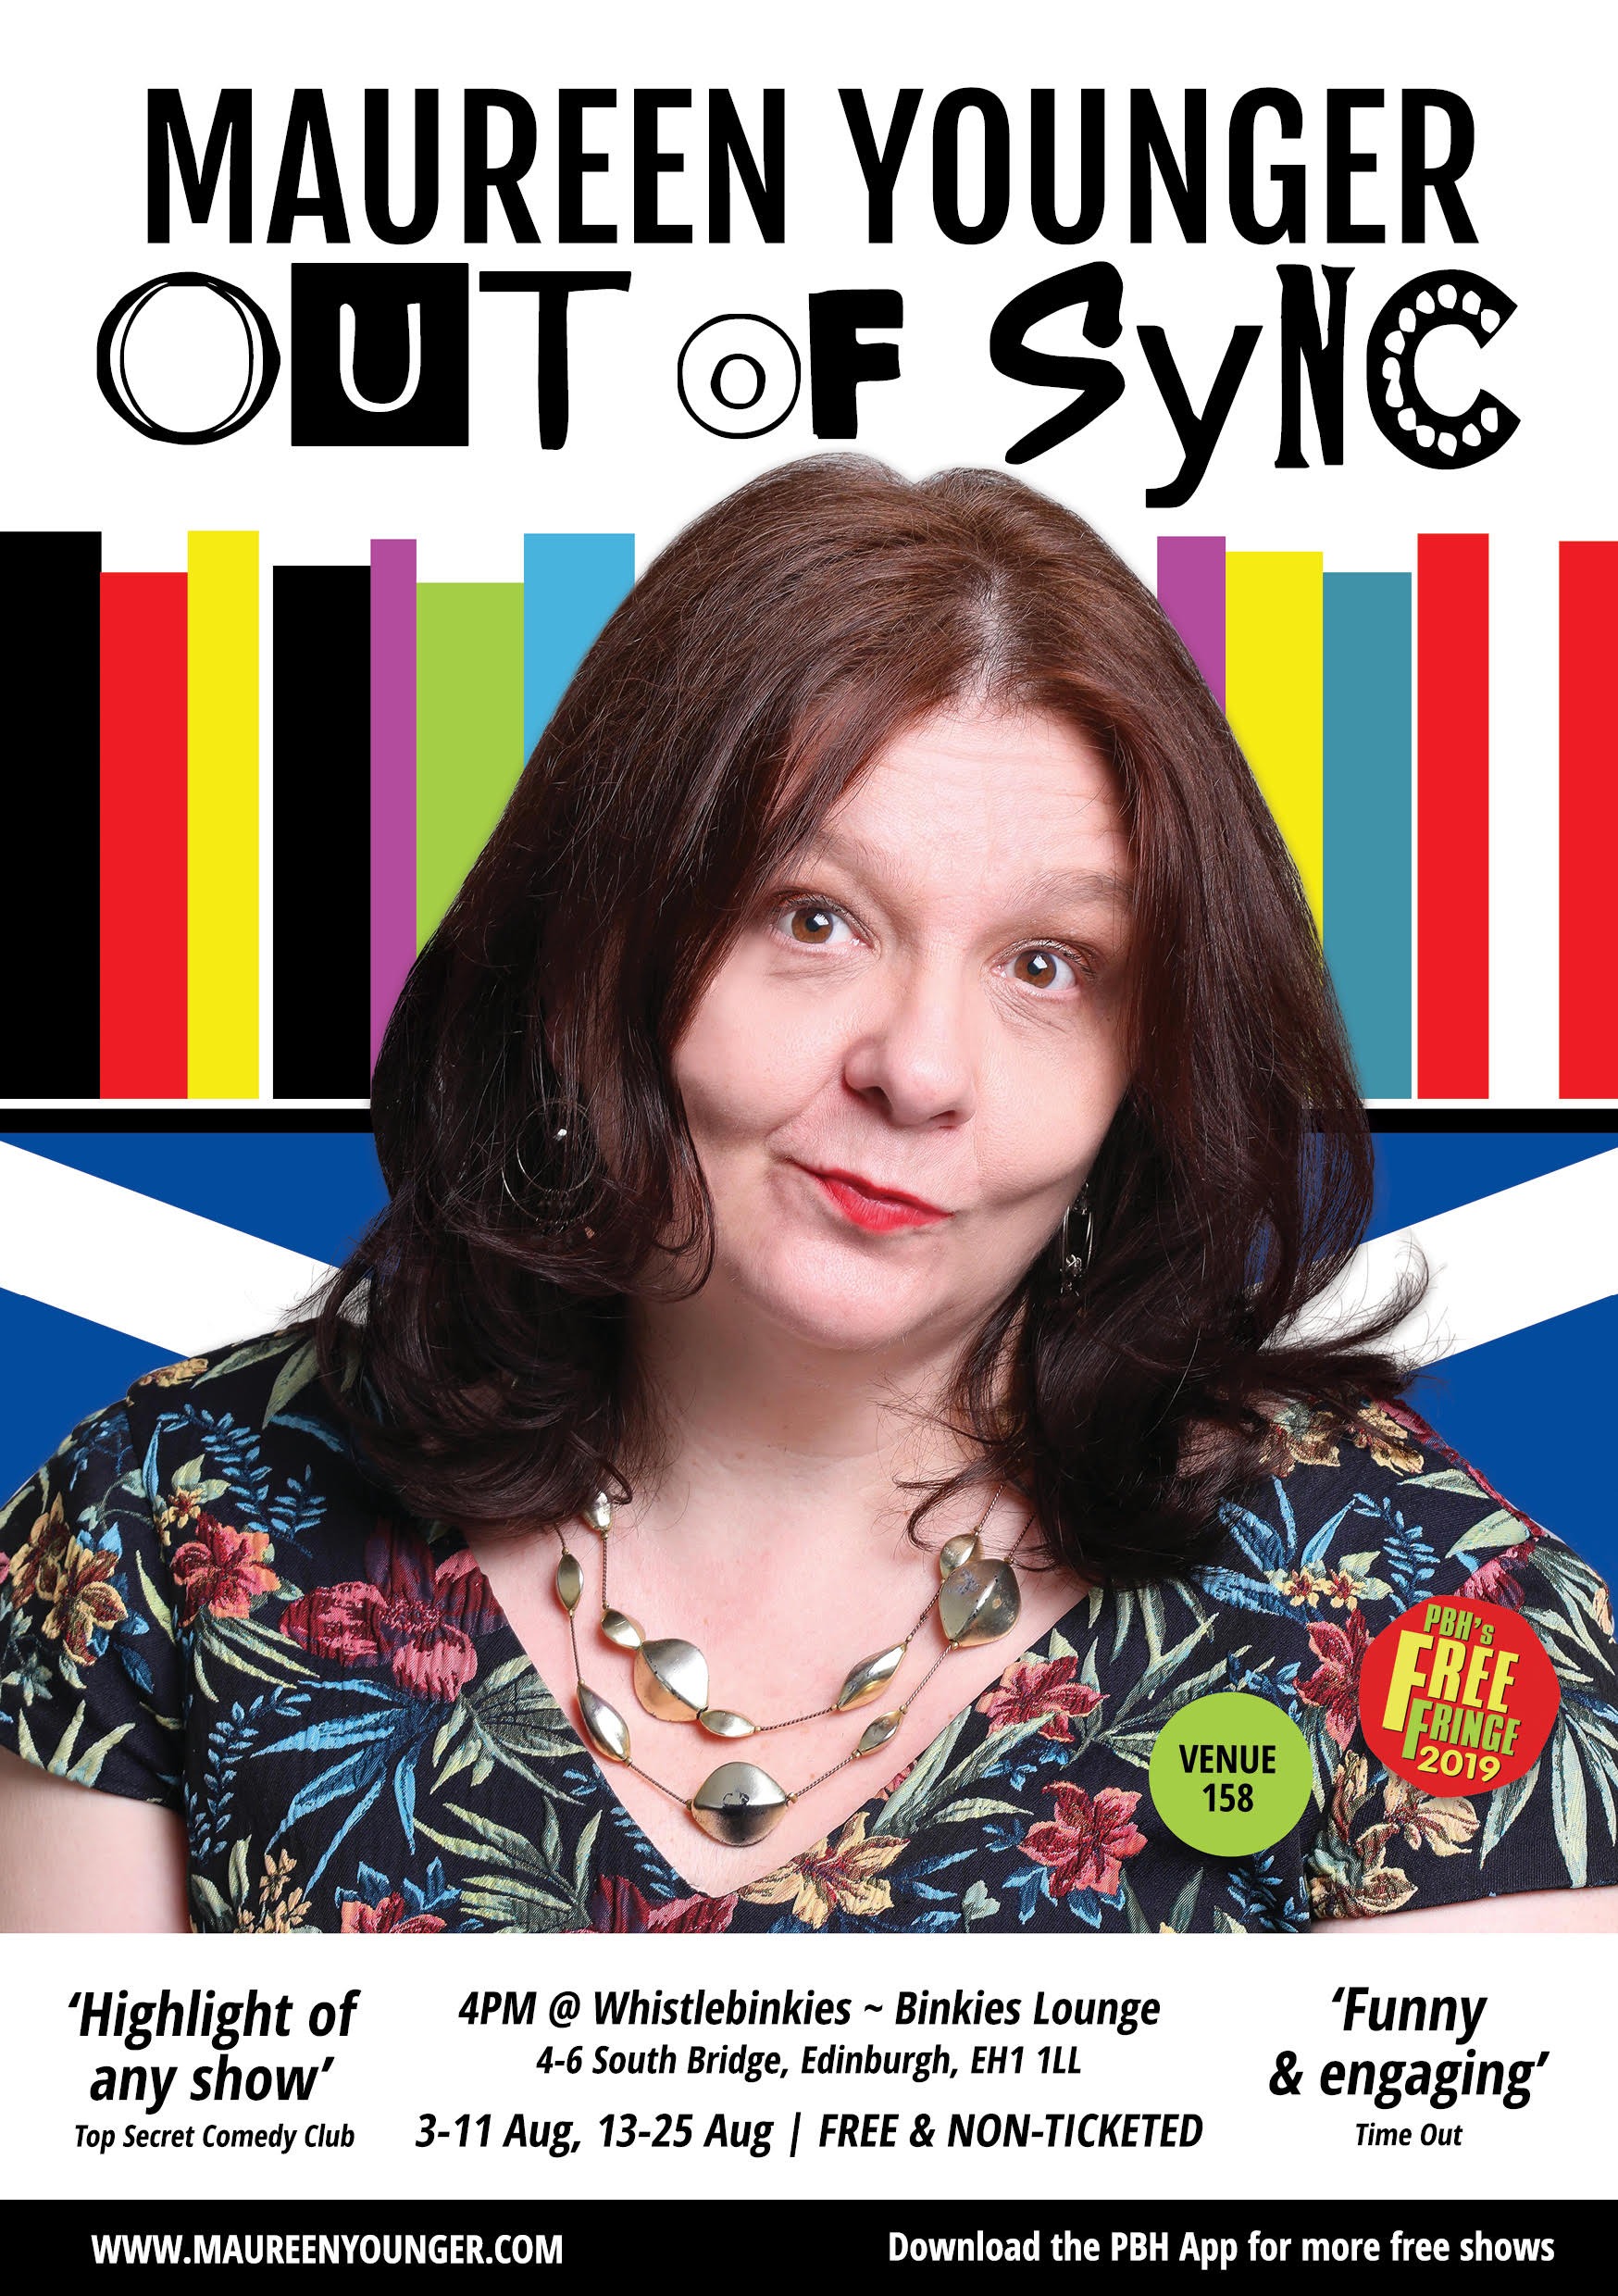 The poster for Maureen Younger: Out of Sync